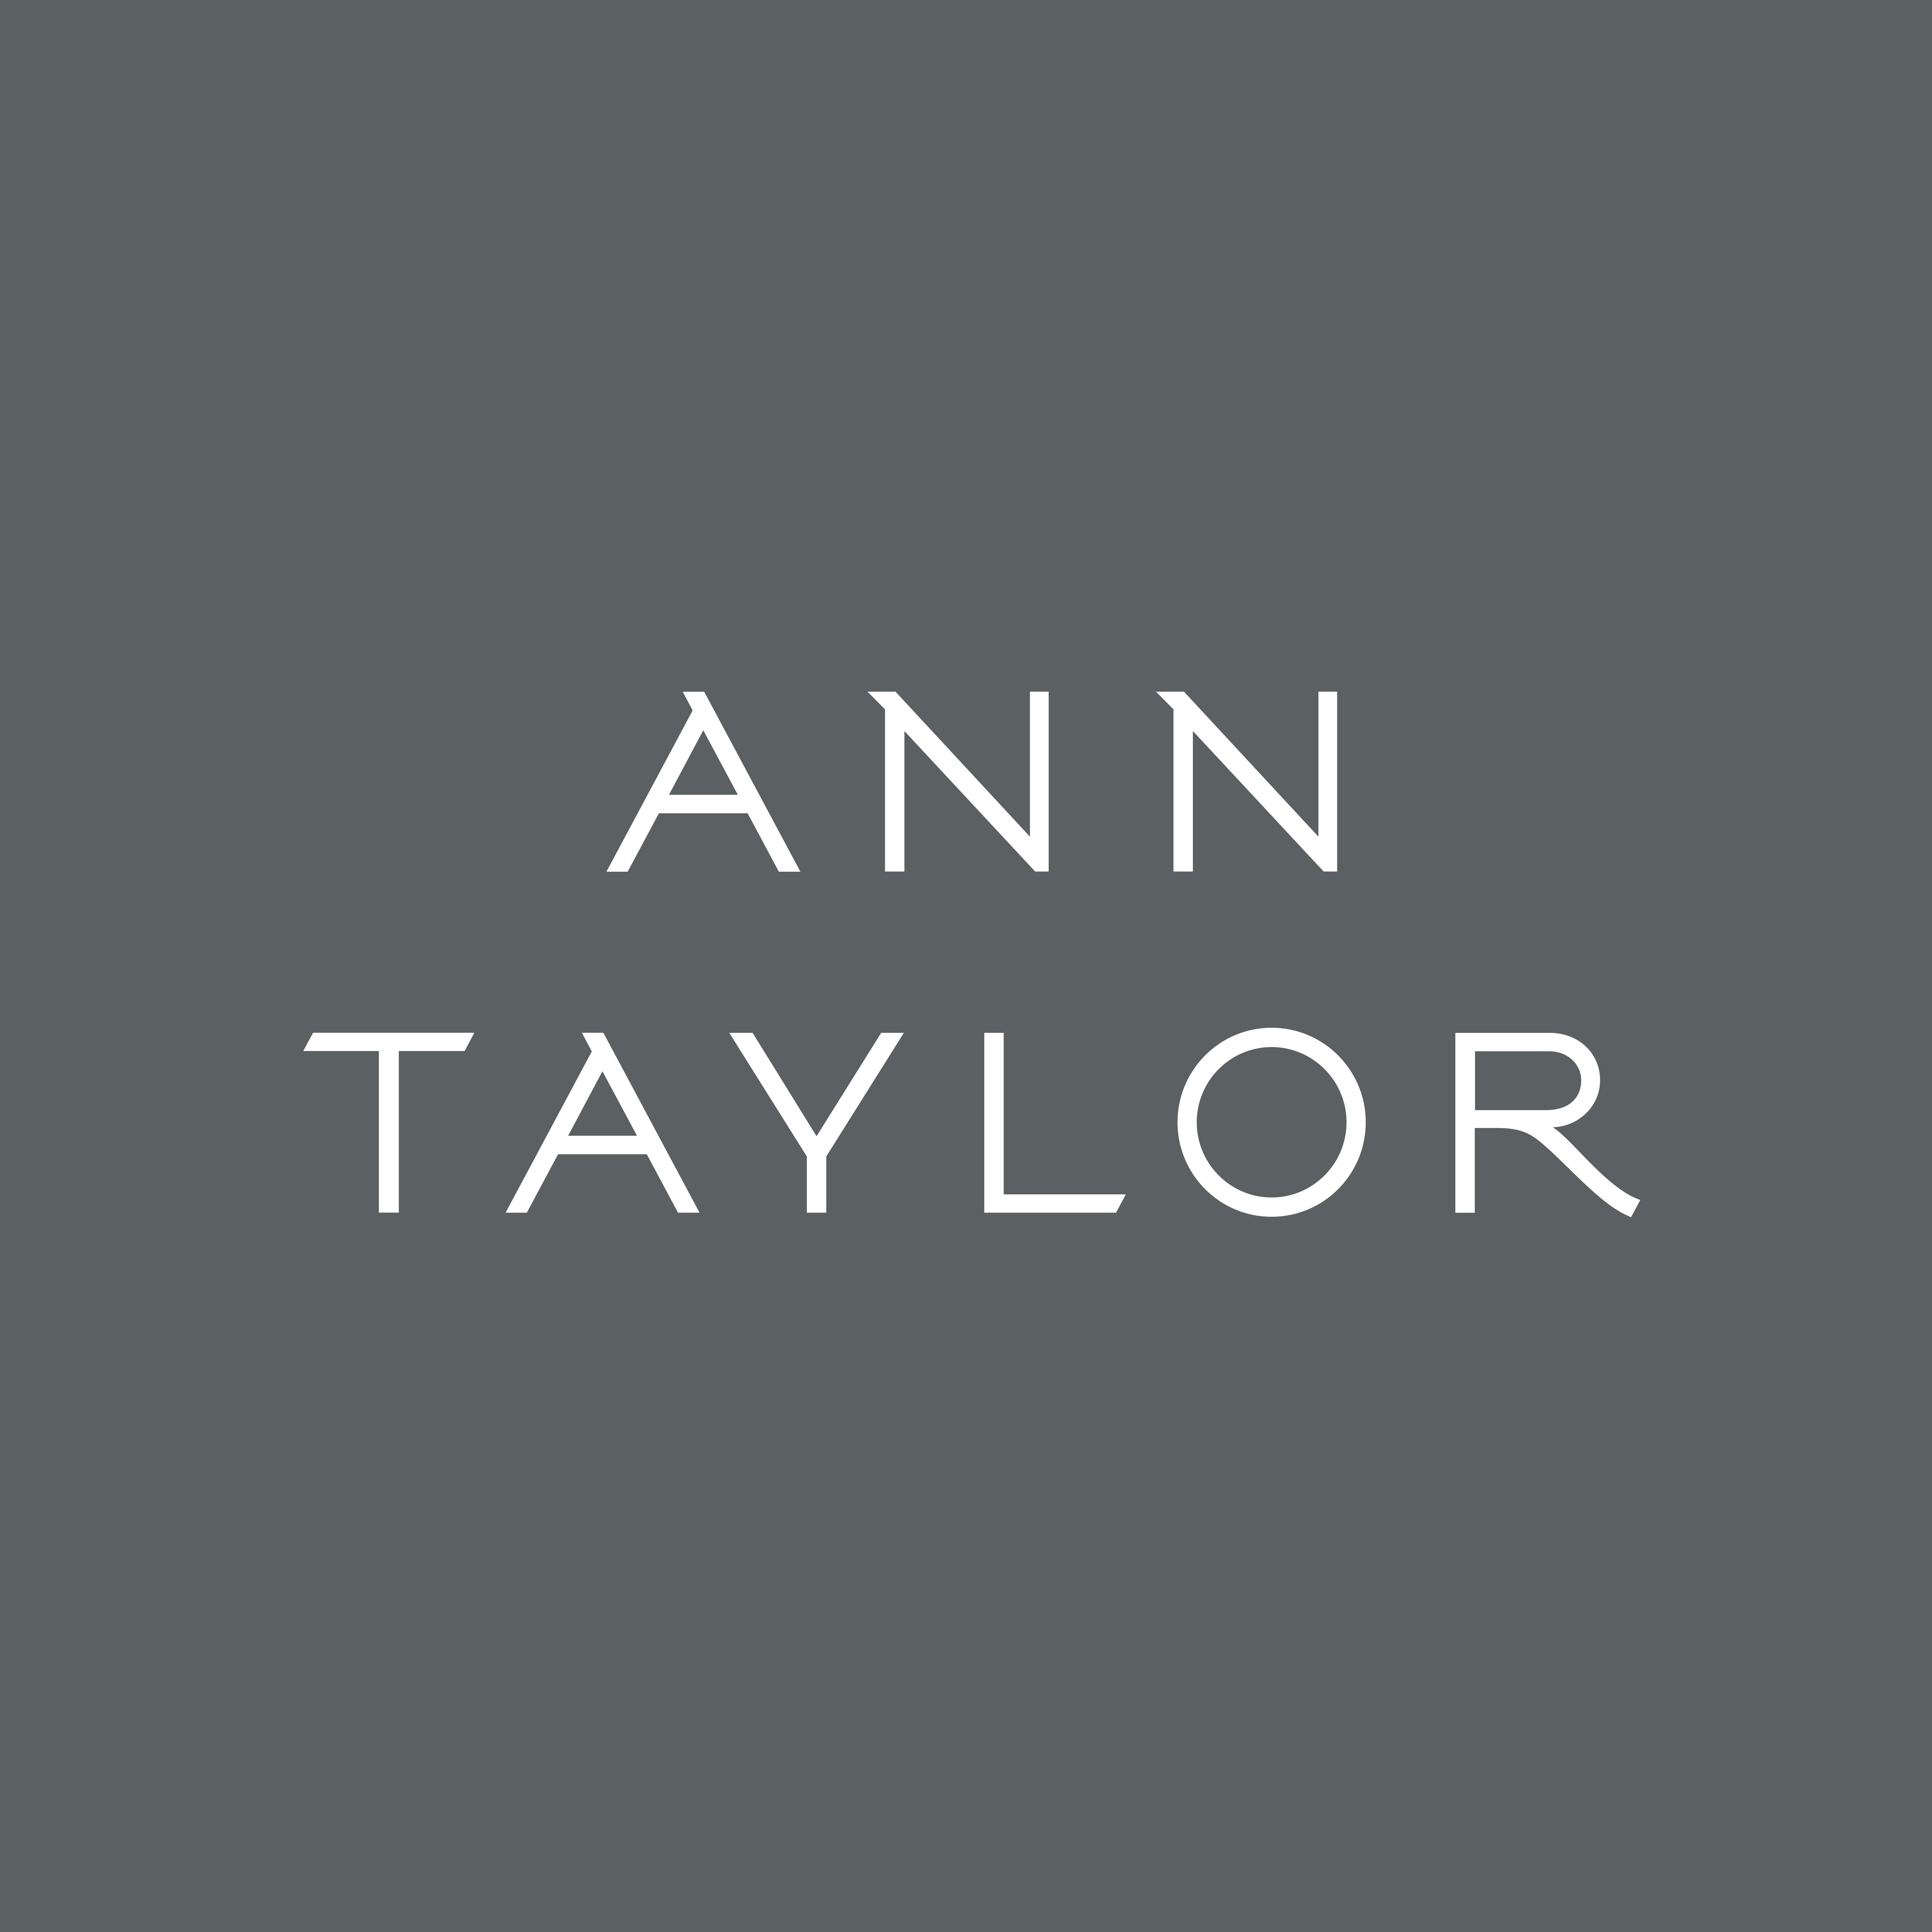 Ann Taylor Dadeland Mall Women S Clothing Suits Dresses Cashmere Sweaters Petites In Miami Fl [ 5000 x 5000 Pixel ]